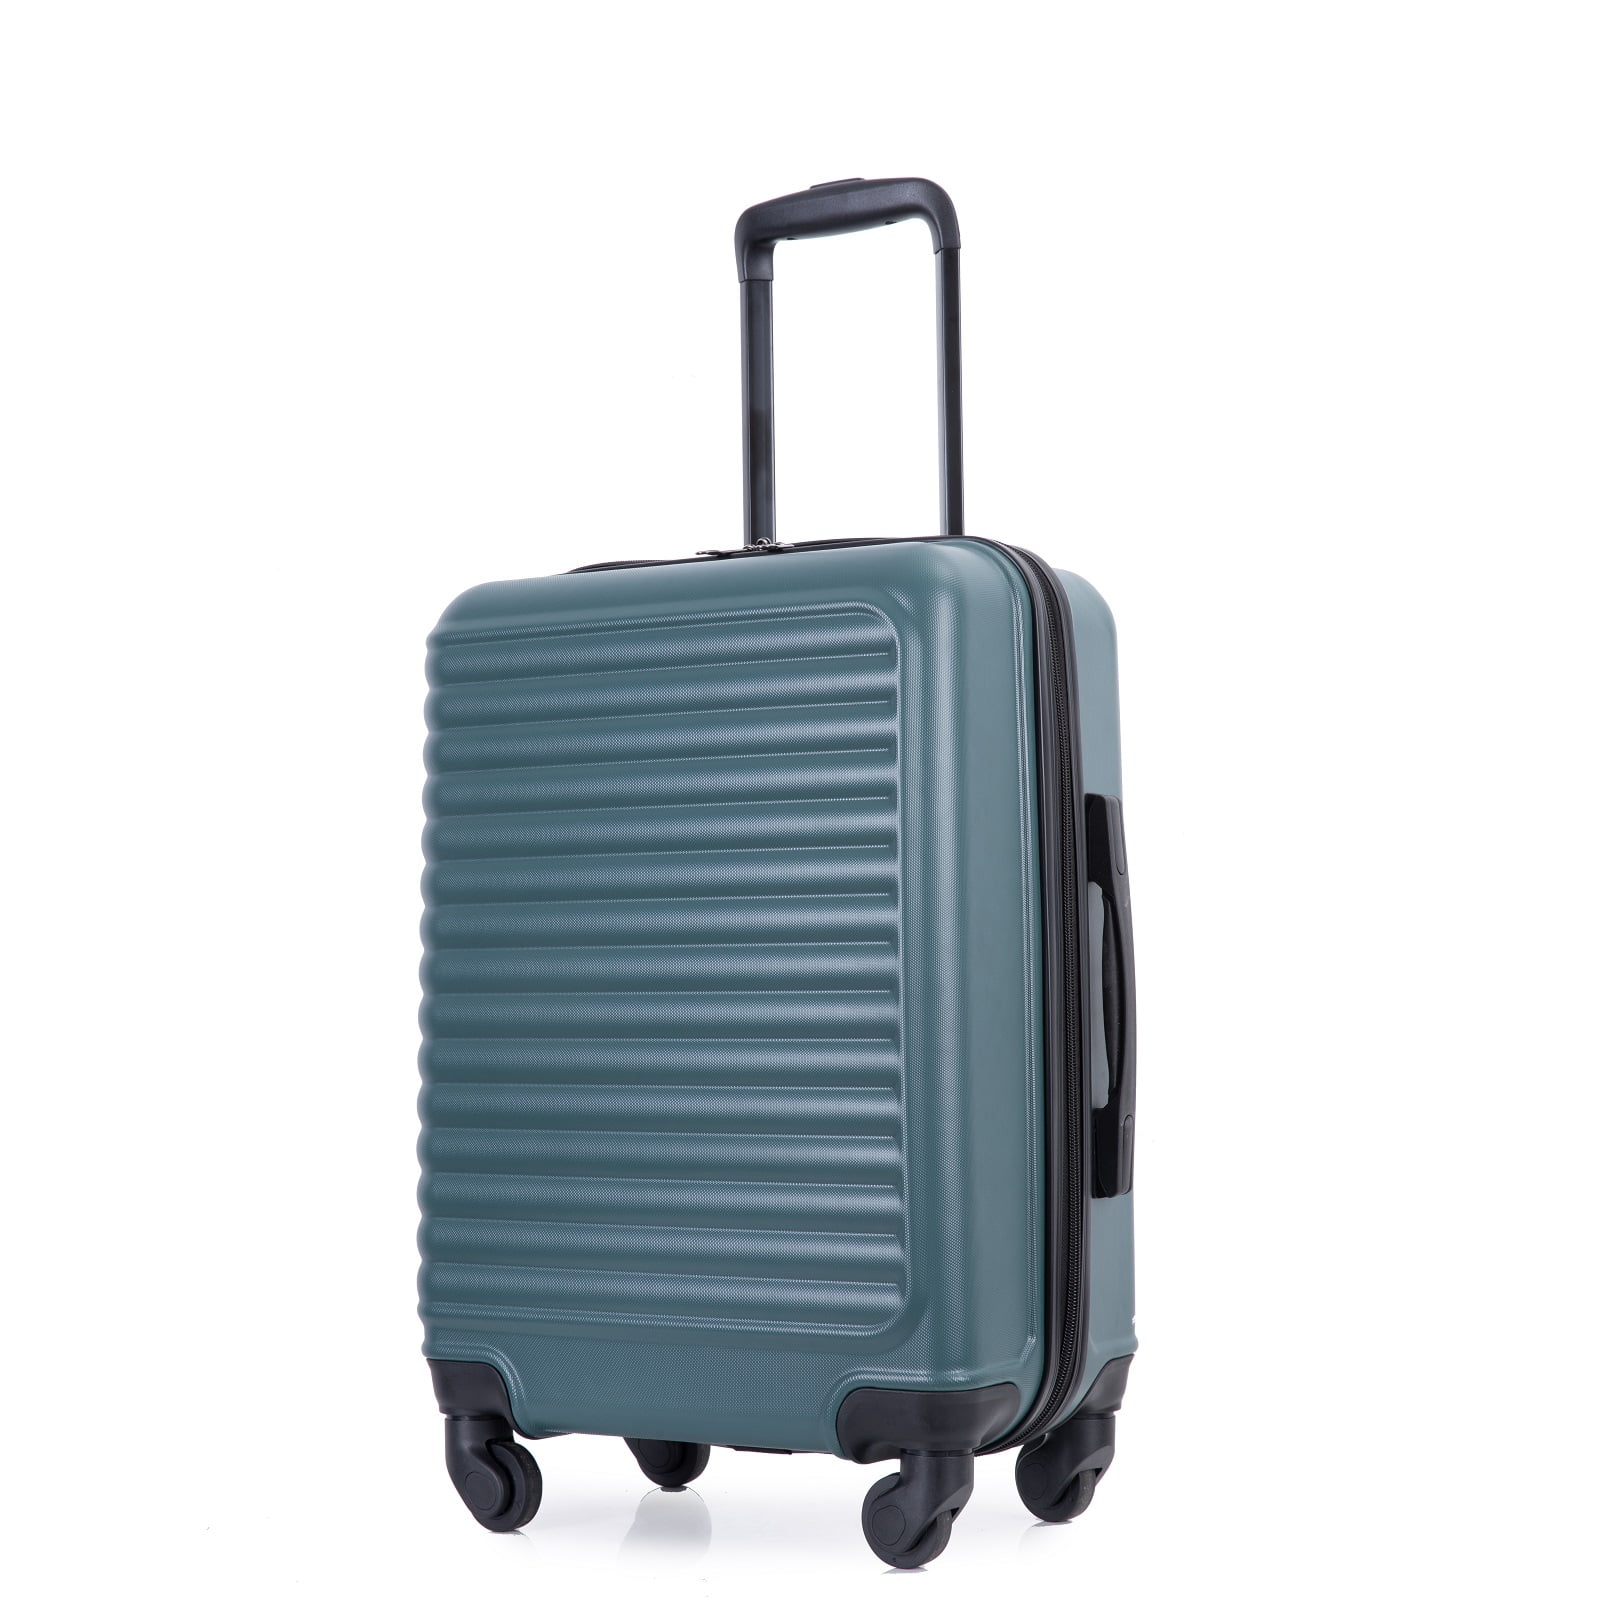 21" Travelhouse ABS Hardshell Light-weight Carry On Luggage w/ Silent Spinner Wheels (Various) $38 + Free Shipping